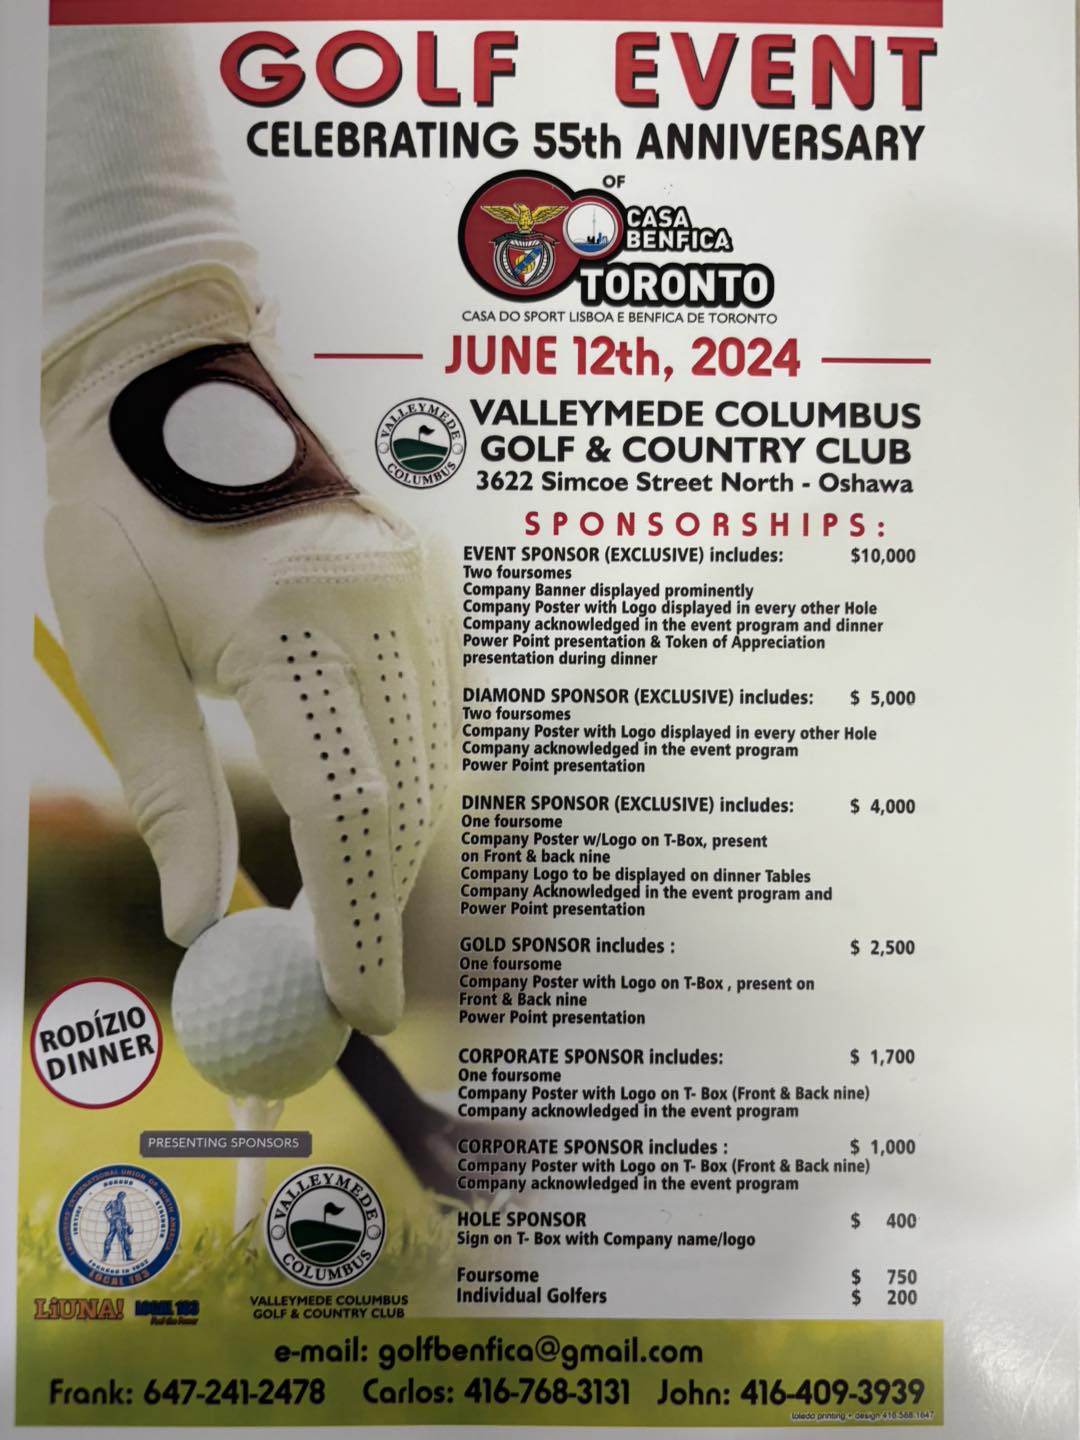 Casa do Benfica Toronto 55th Anniversary Golf Tournament flyer with sponsorship tiers and Rodizio dinner details, June 12, 2024, at Valleymede Columbus Golf Club.